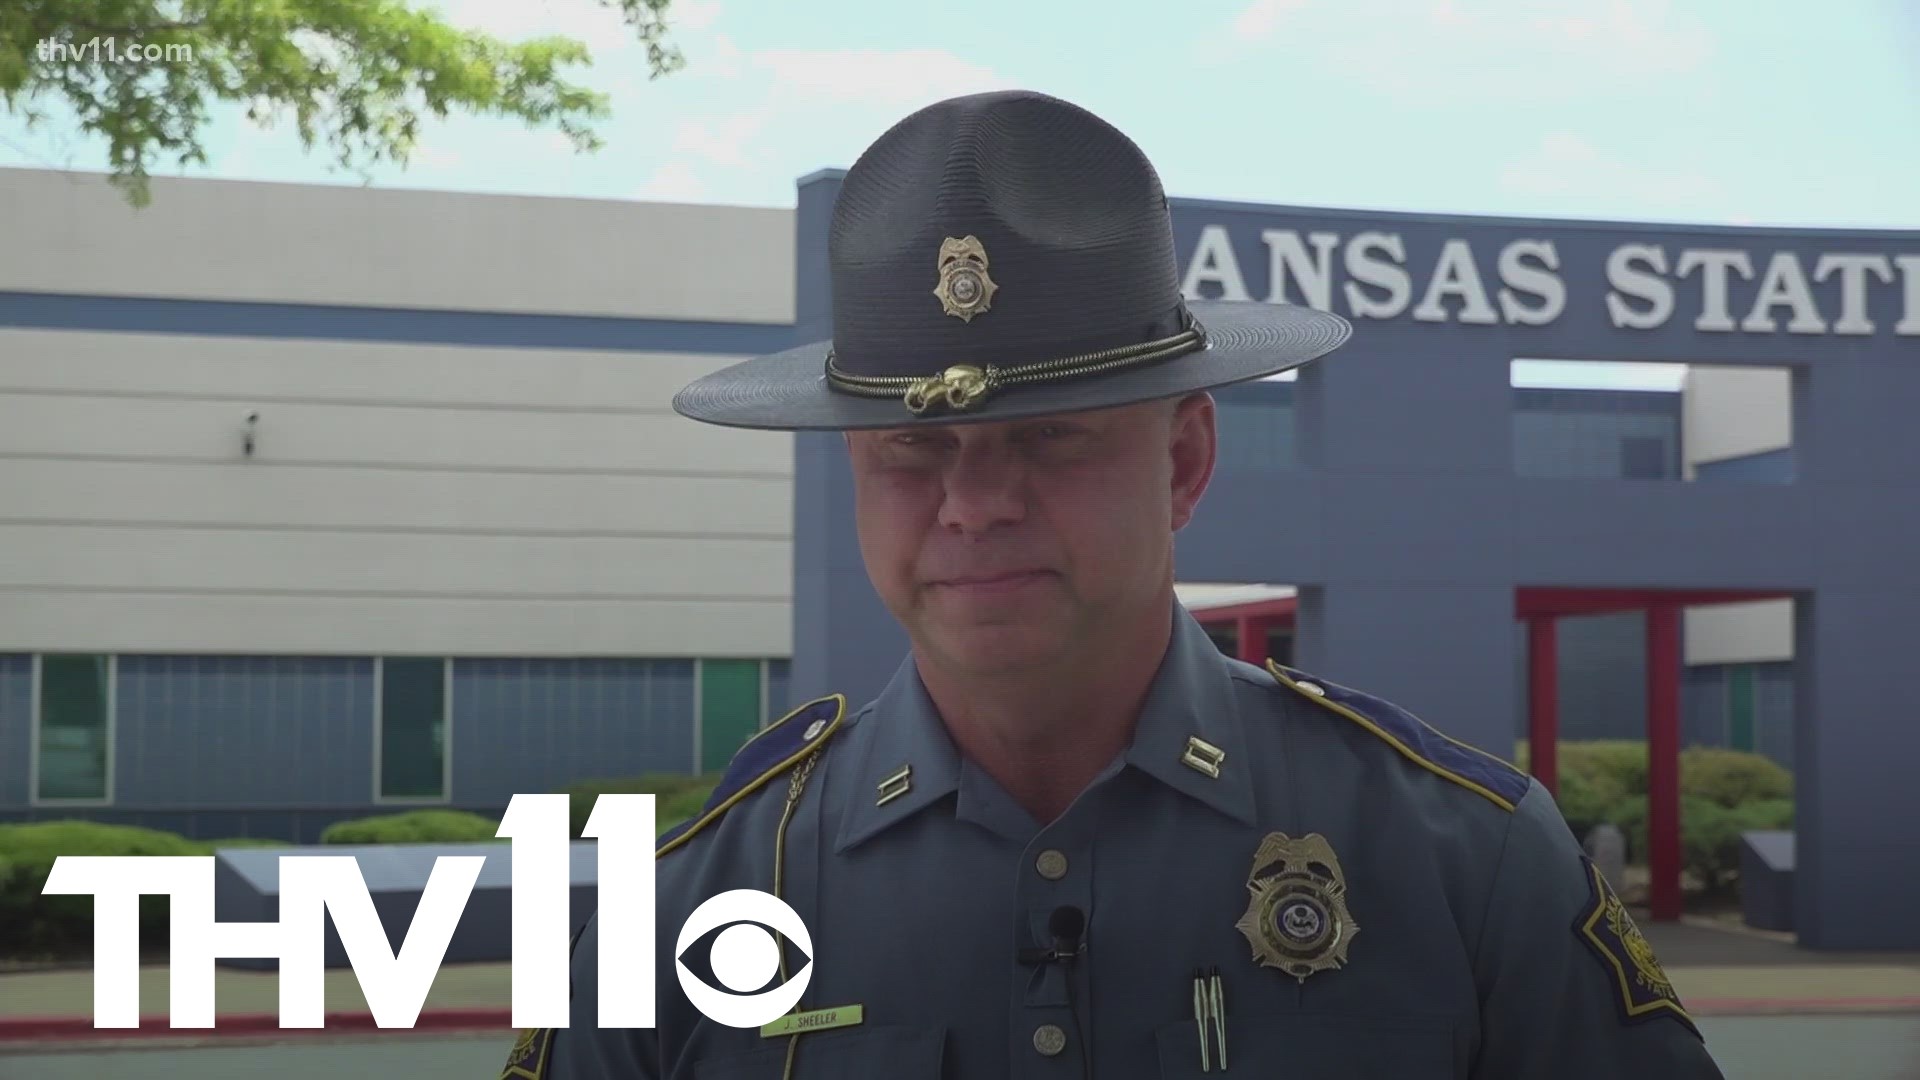 State police are expecting a busy summer as they keep a close eye on the roads in an attempt to make Arkansas streets safer.